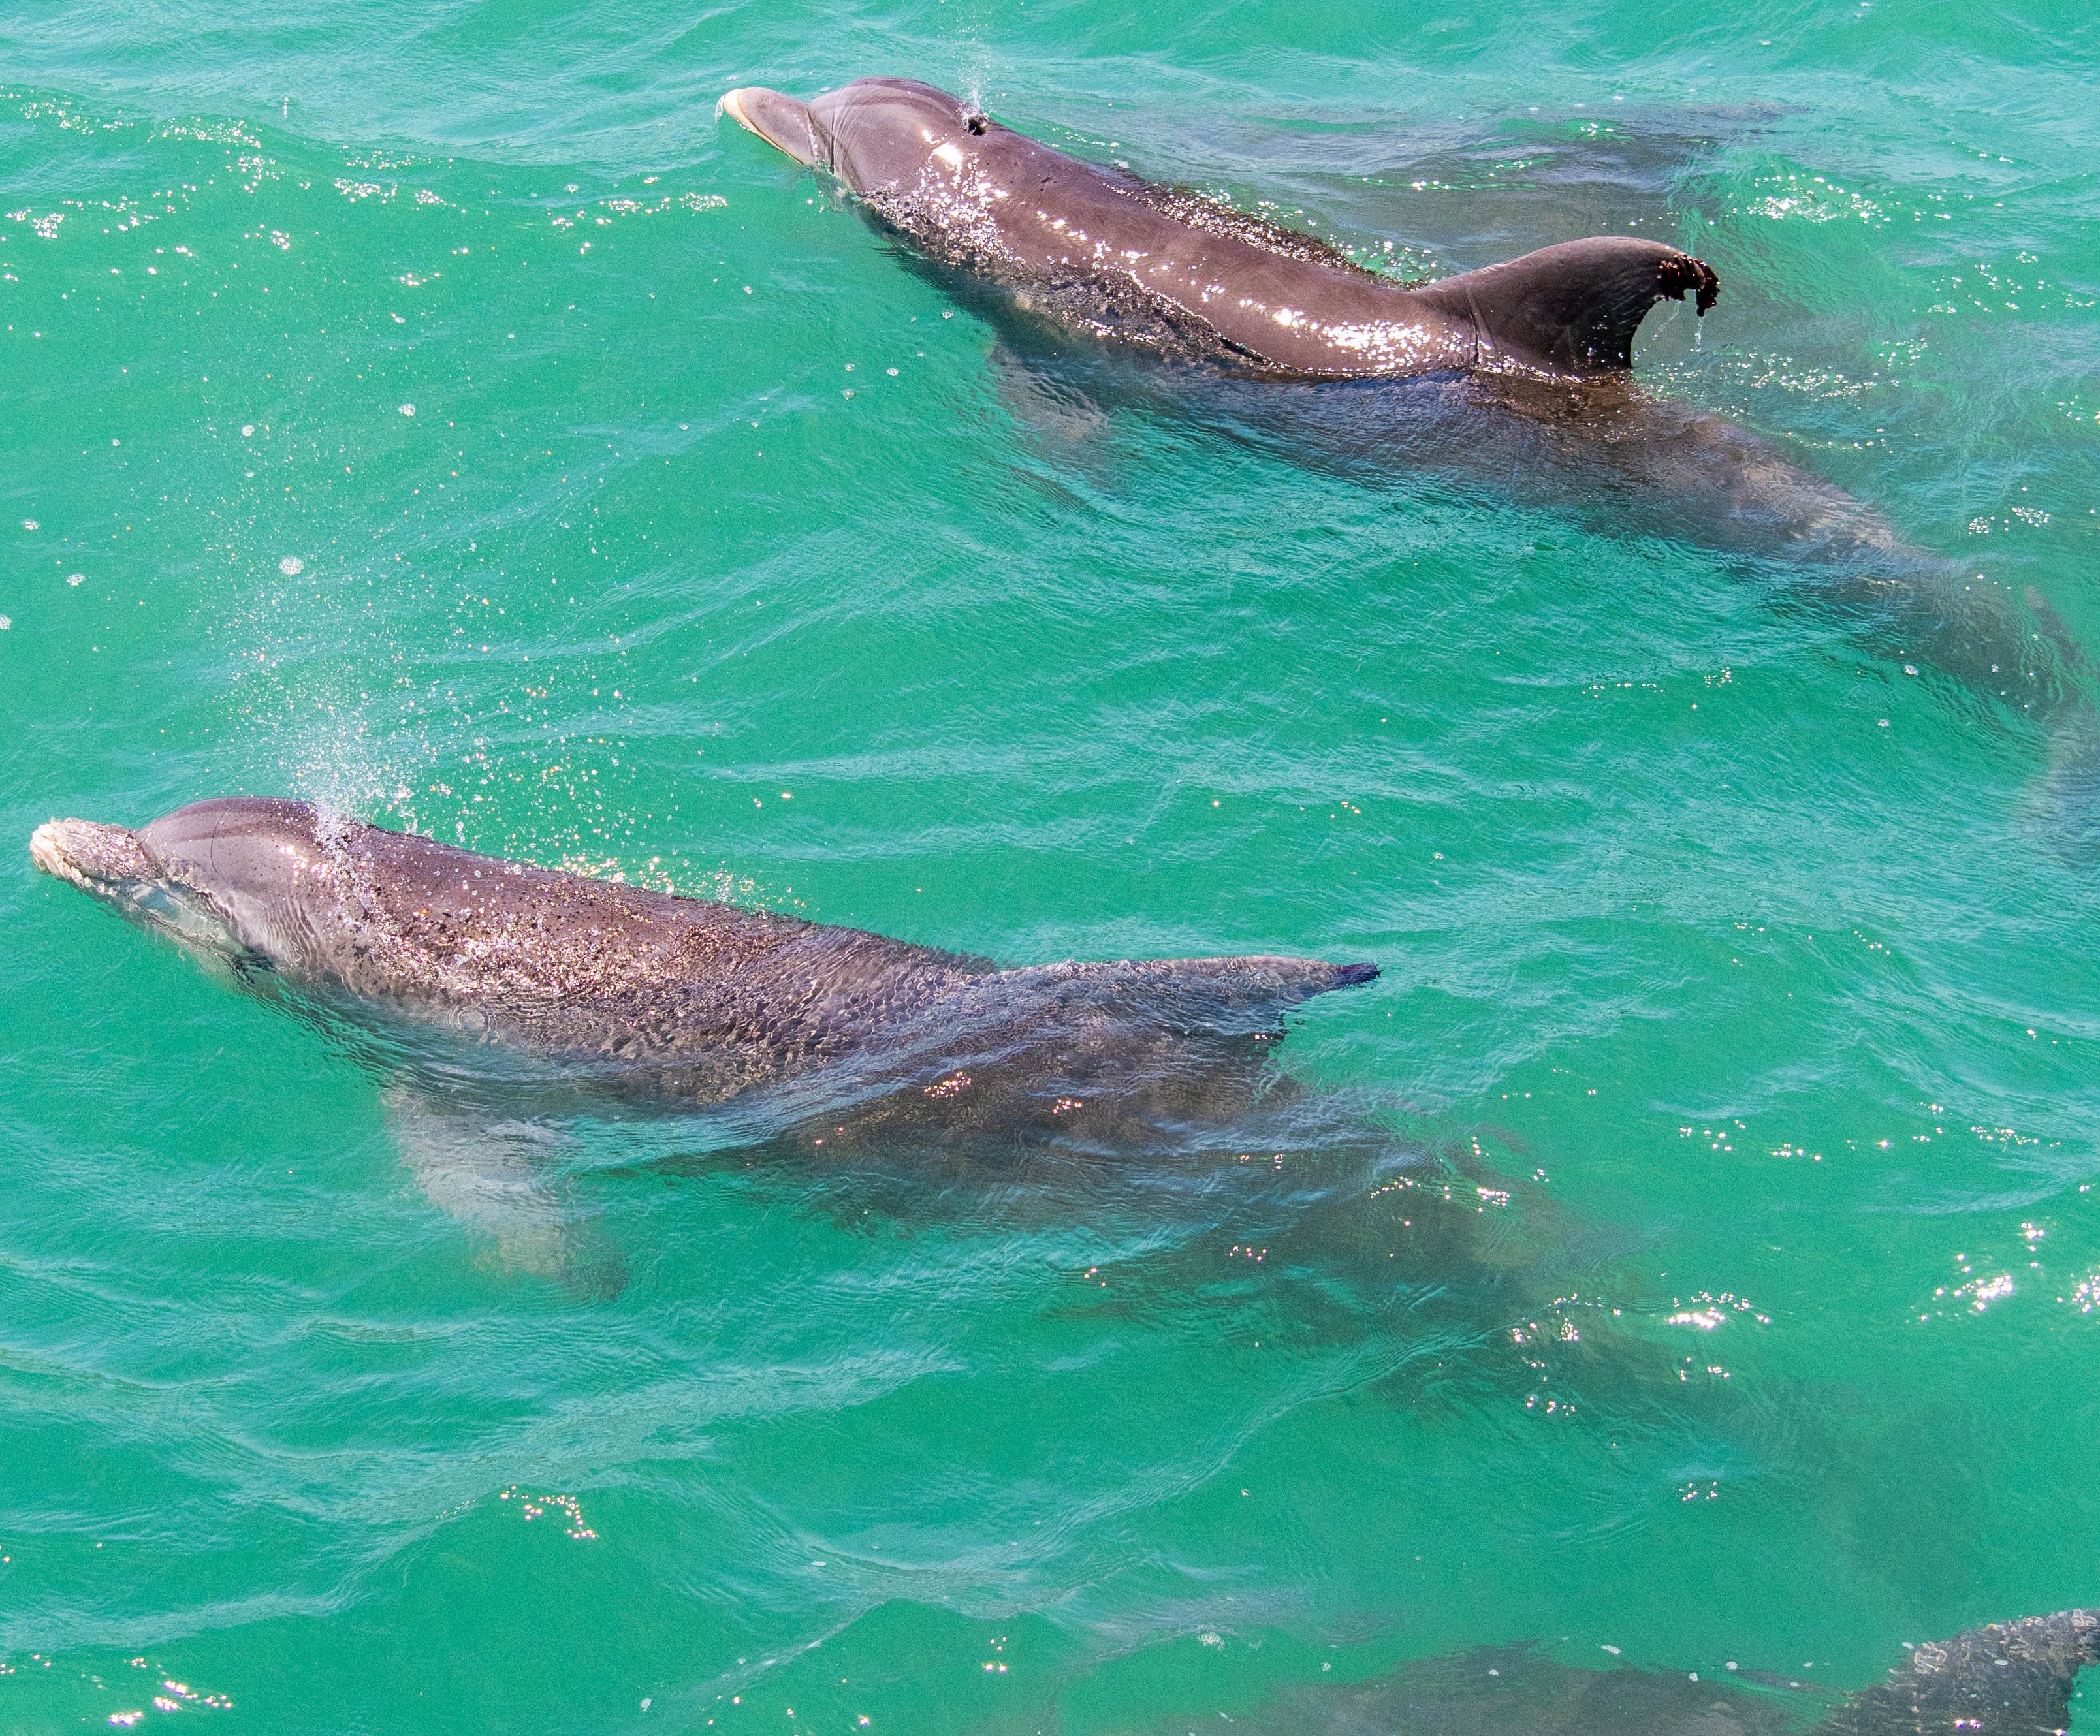 Dolphins swim in turquoise waters in South Padre Island, TX.